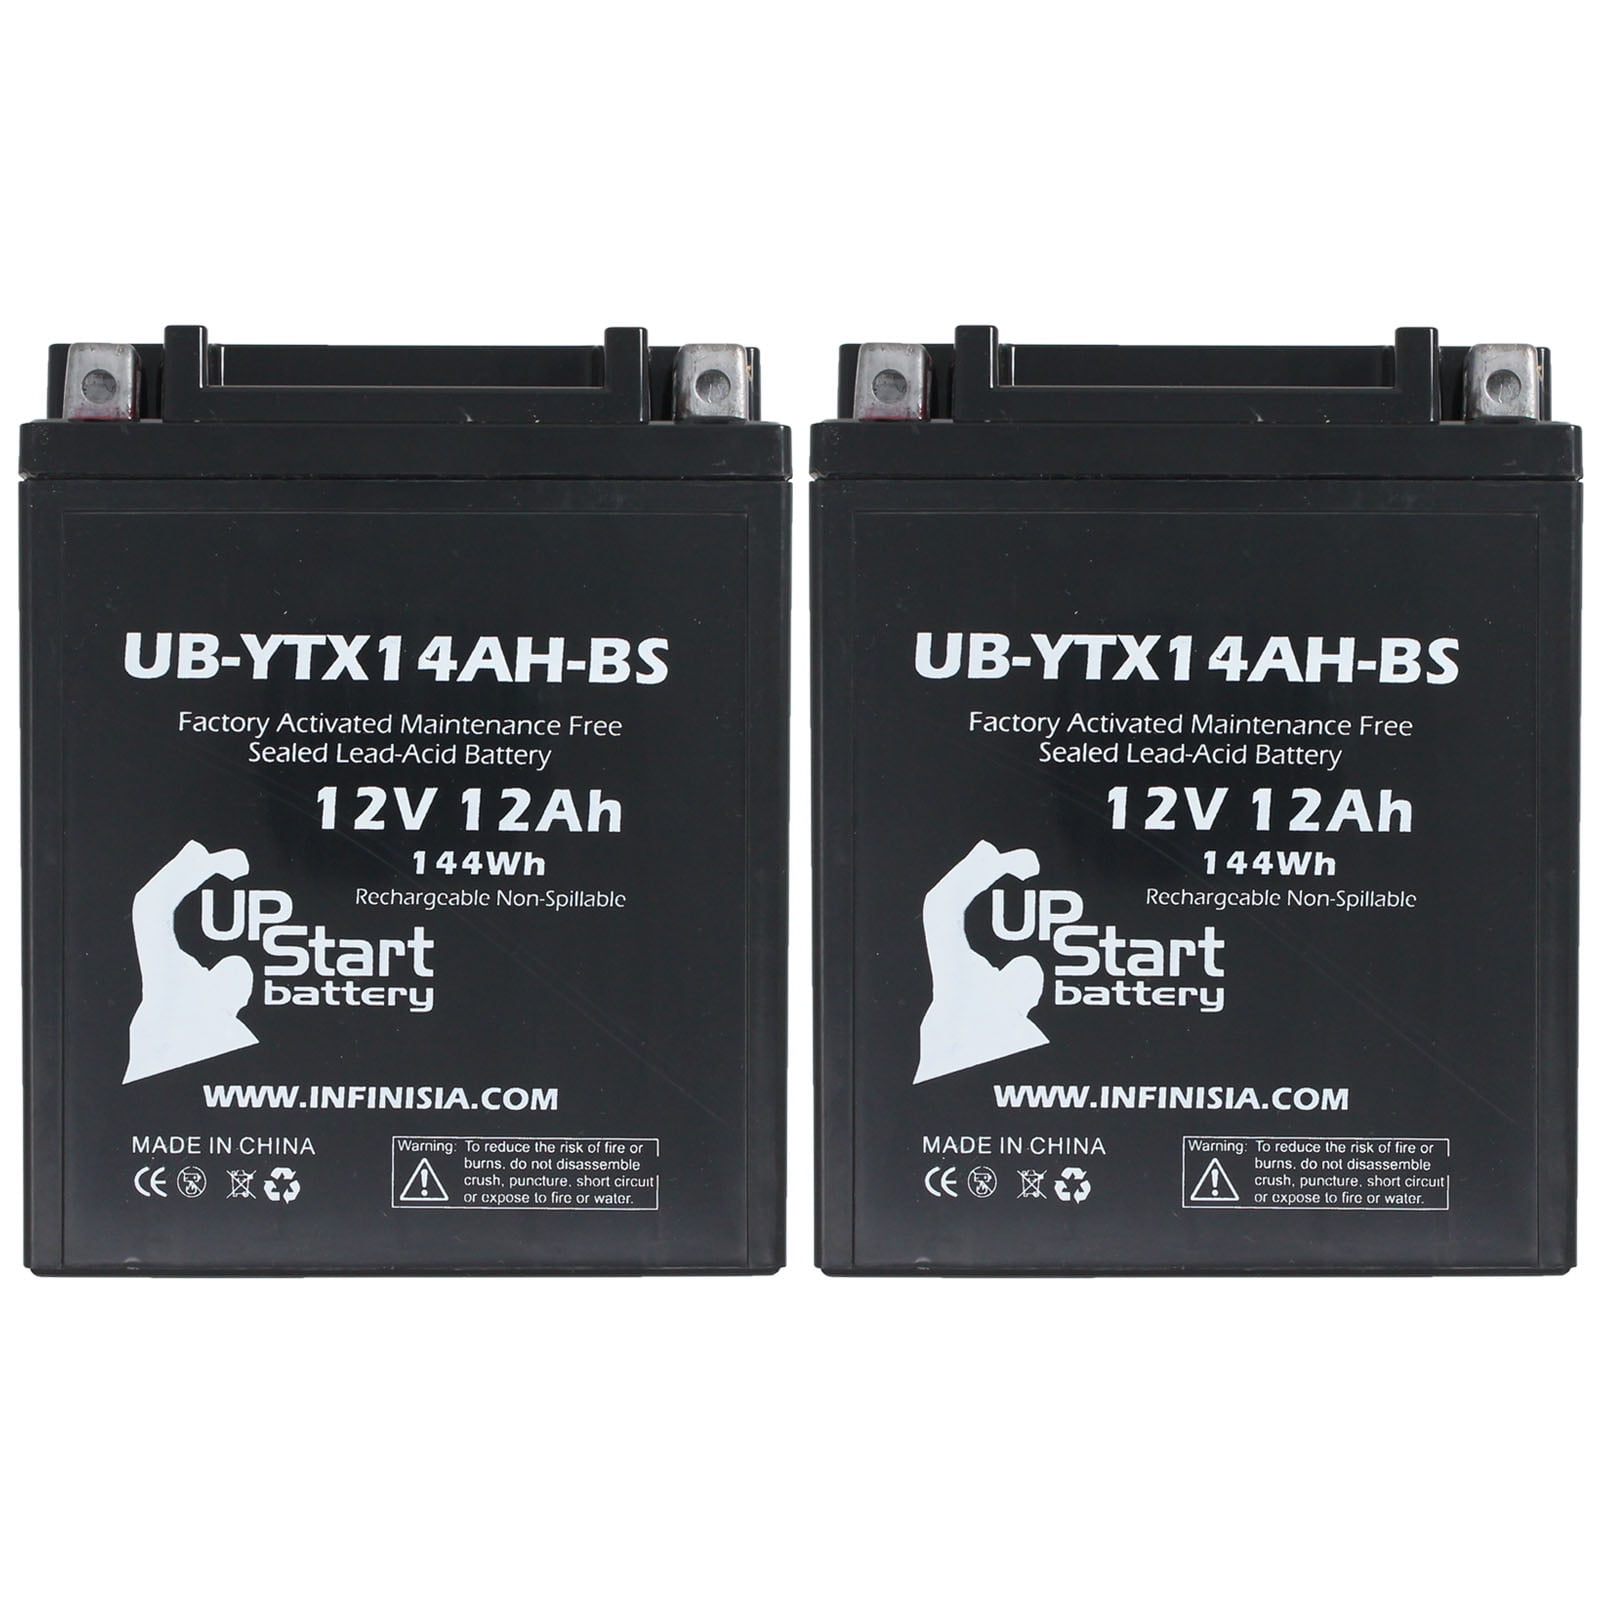 2-Pack UB-YTX14AH-BS Battery Replacement for 1992 Bimota Tesi 900 CC  Motorcycle Factory Activated, Maintenance Free, Motorcycle Battery 12V,  12AH, UpStart Battery Brand